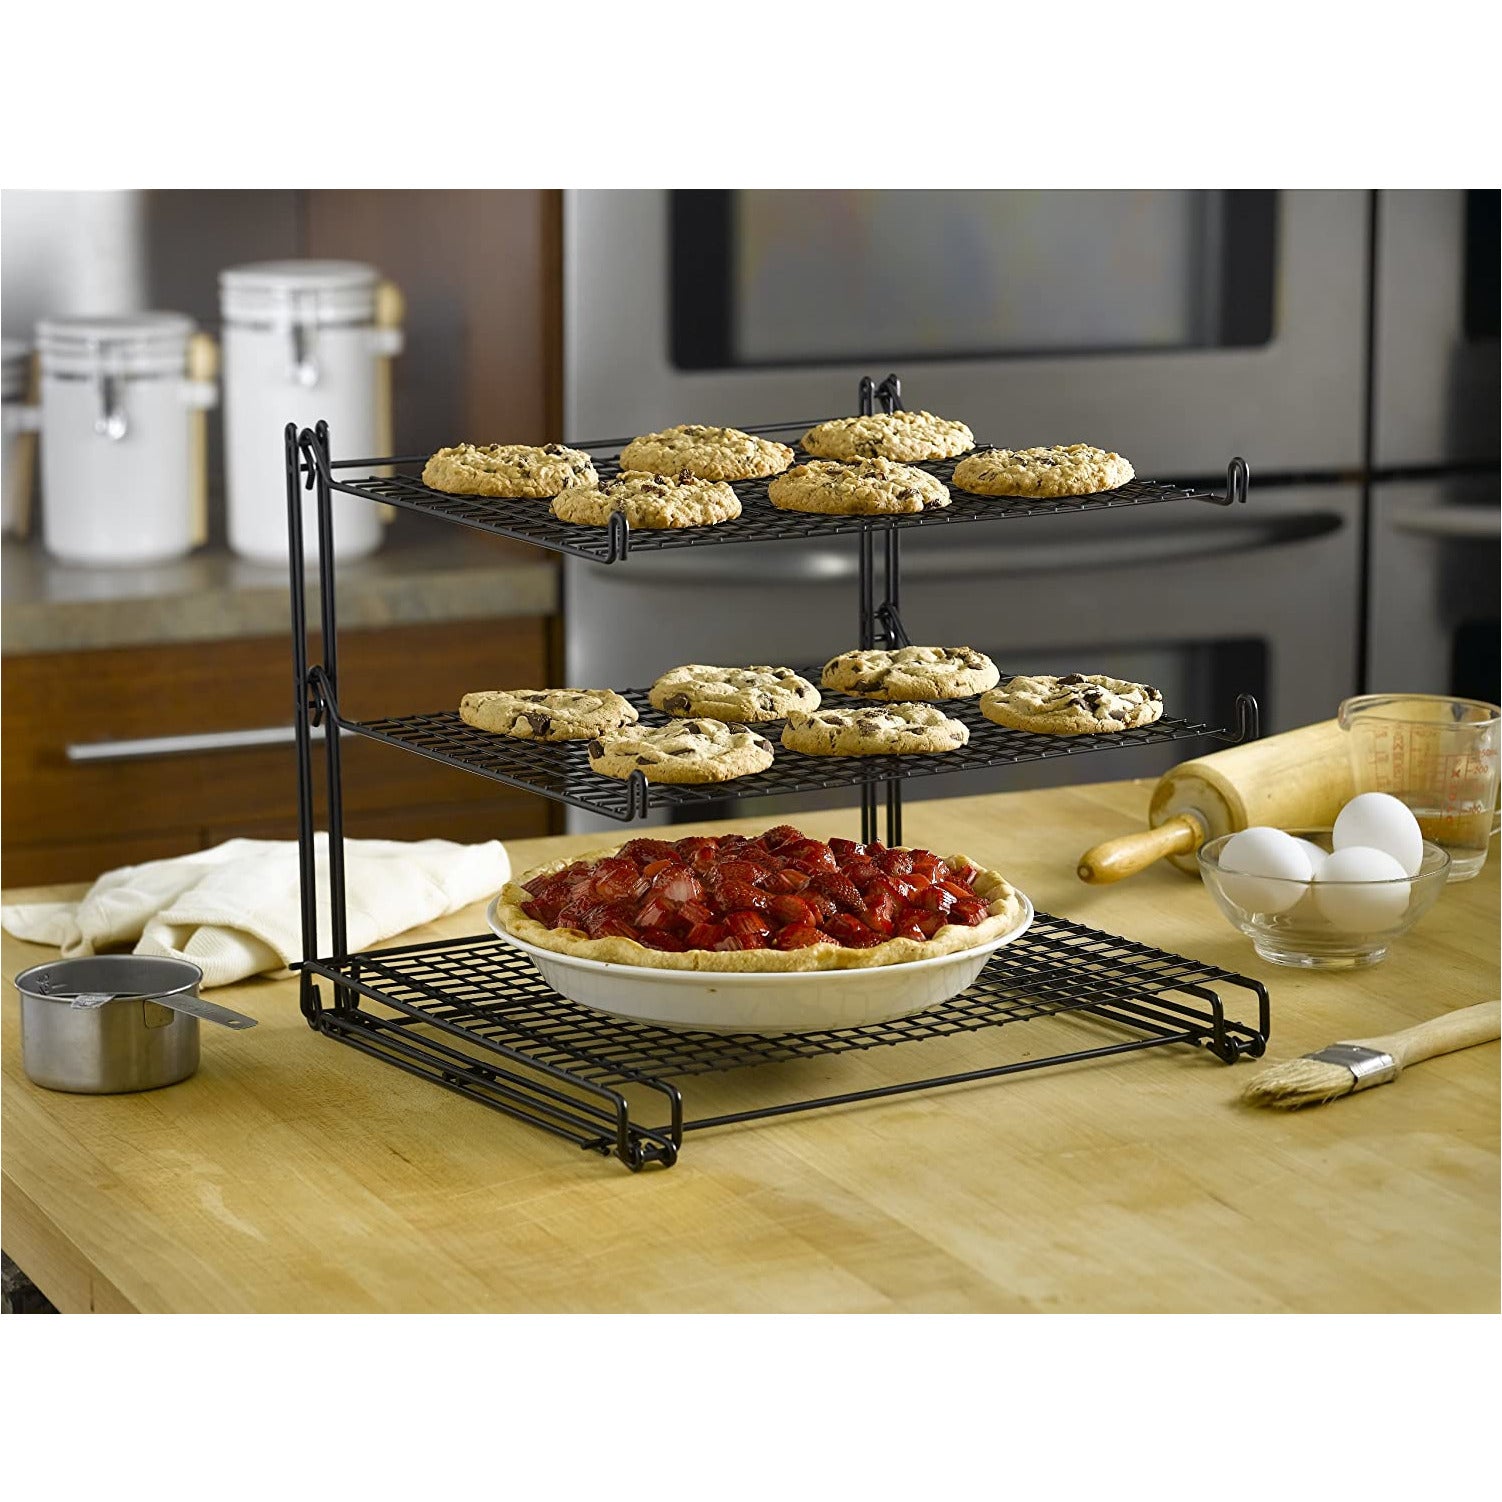  Stainless Steel Wire Cooling Rack-14x20-Ultra Heavy Duty,  Commercial Grade, Extra Large-Cool Cookies, Cakes & Bread-Perfect for Baking  Meat & Bacon-Fits 3/4 Big Sheet Pan-Oven & Dishwasher Safe: Home & Kitchen